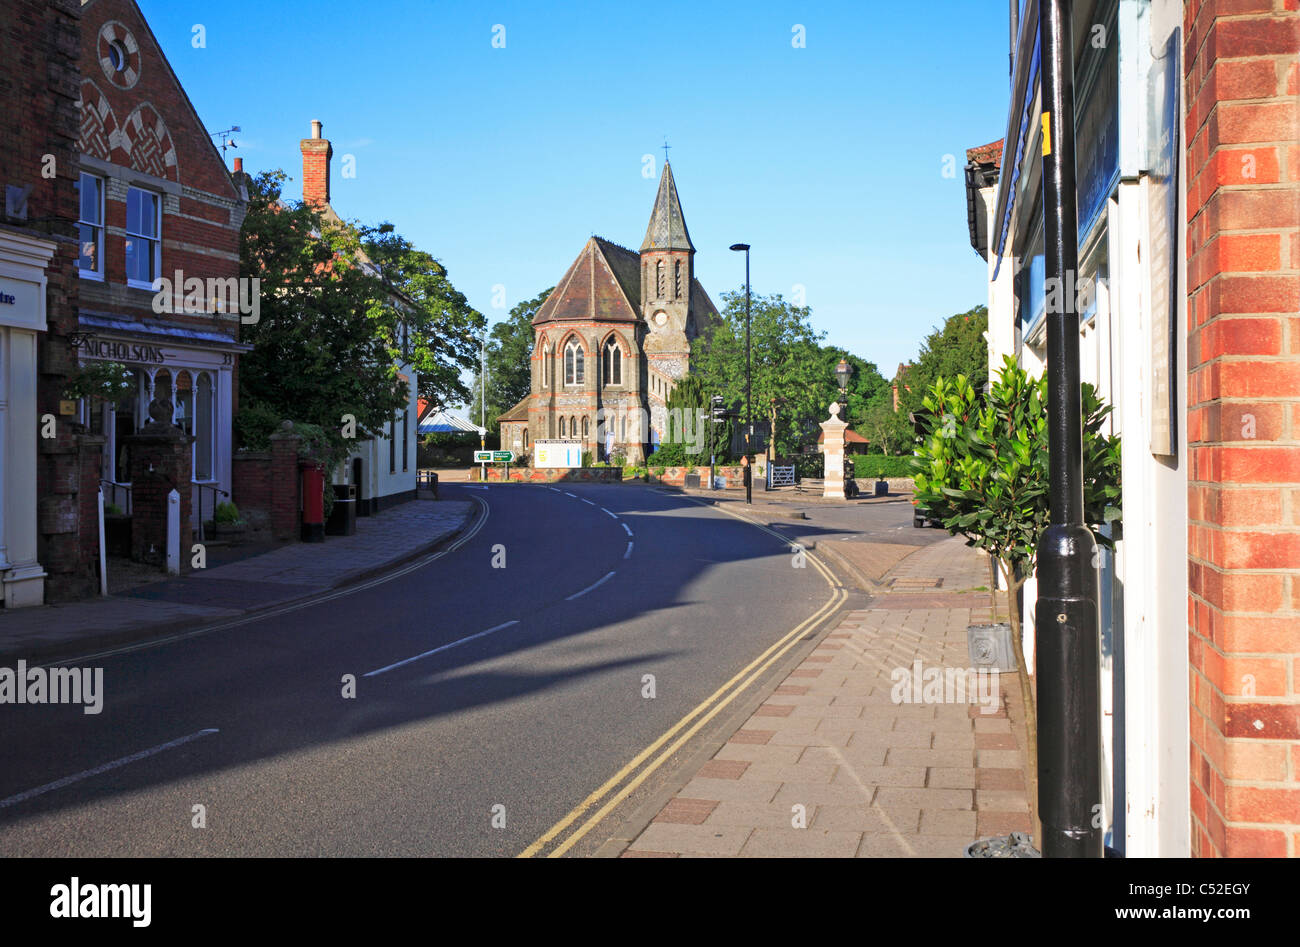 The Methodist Church at the west end of Holt market place, Norfolk, England, United Kingdom. Stock Photo